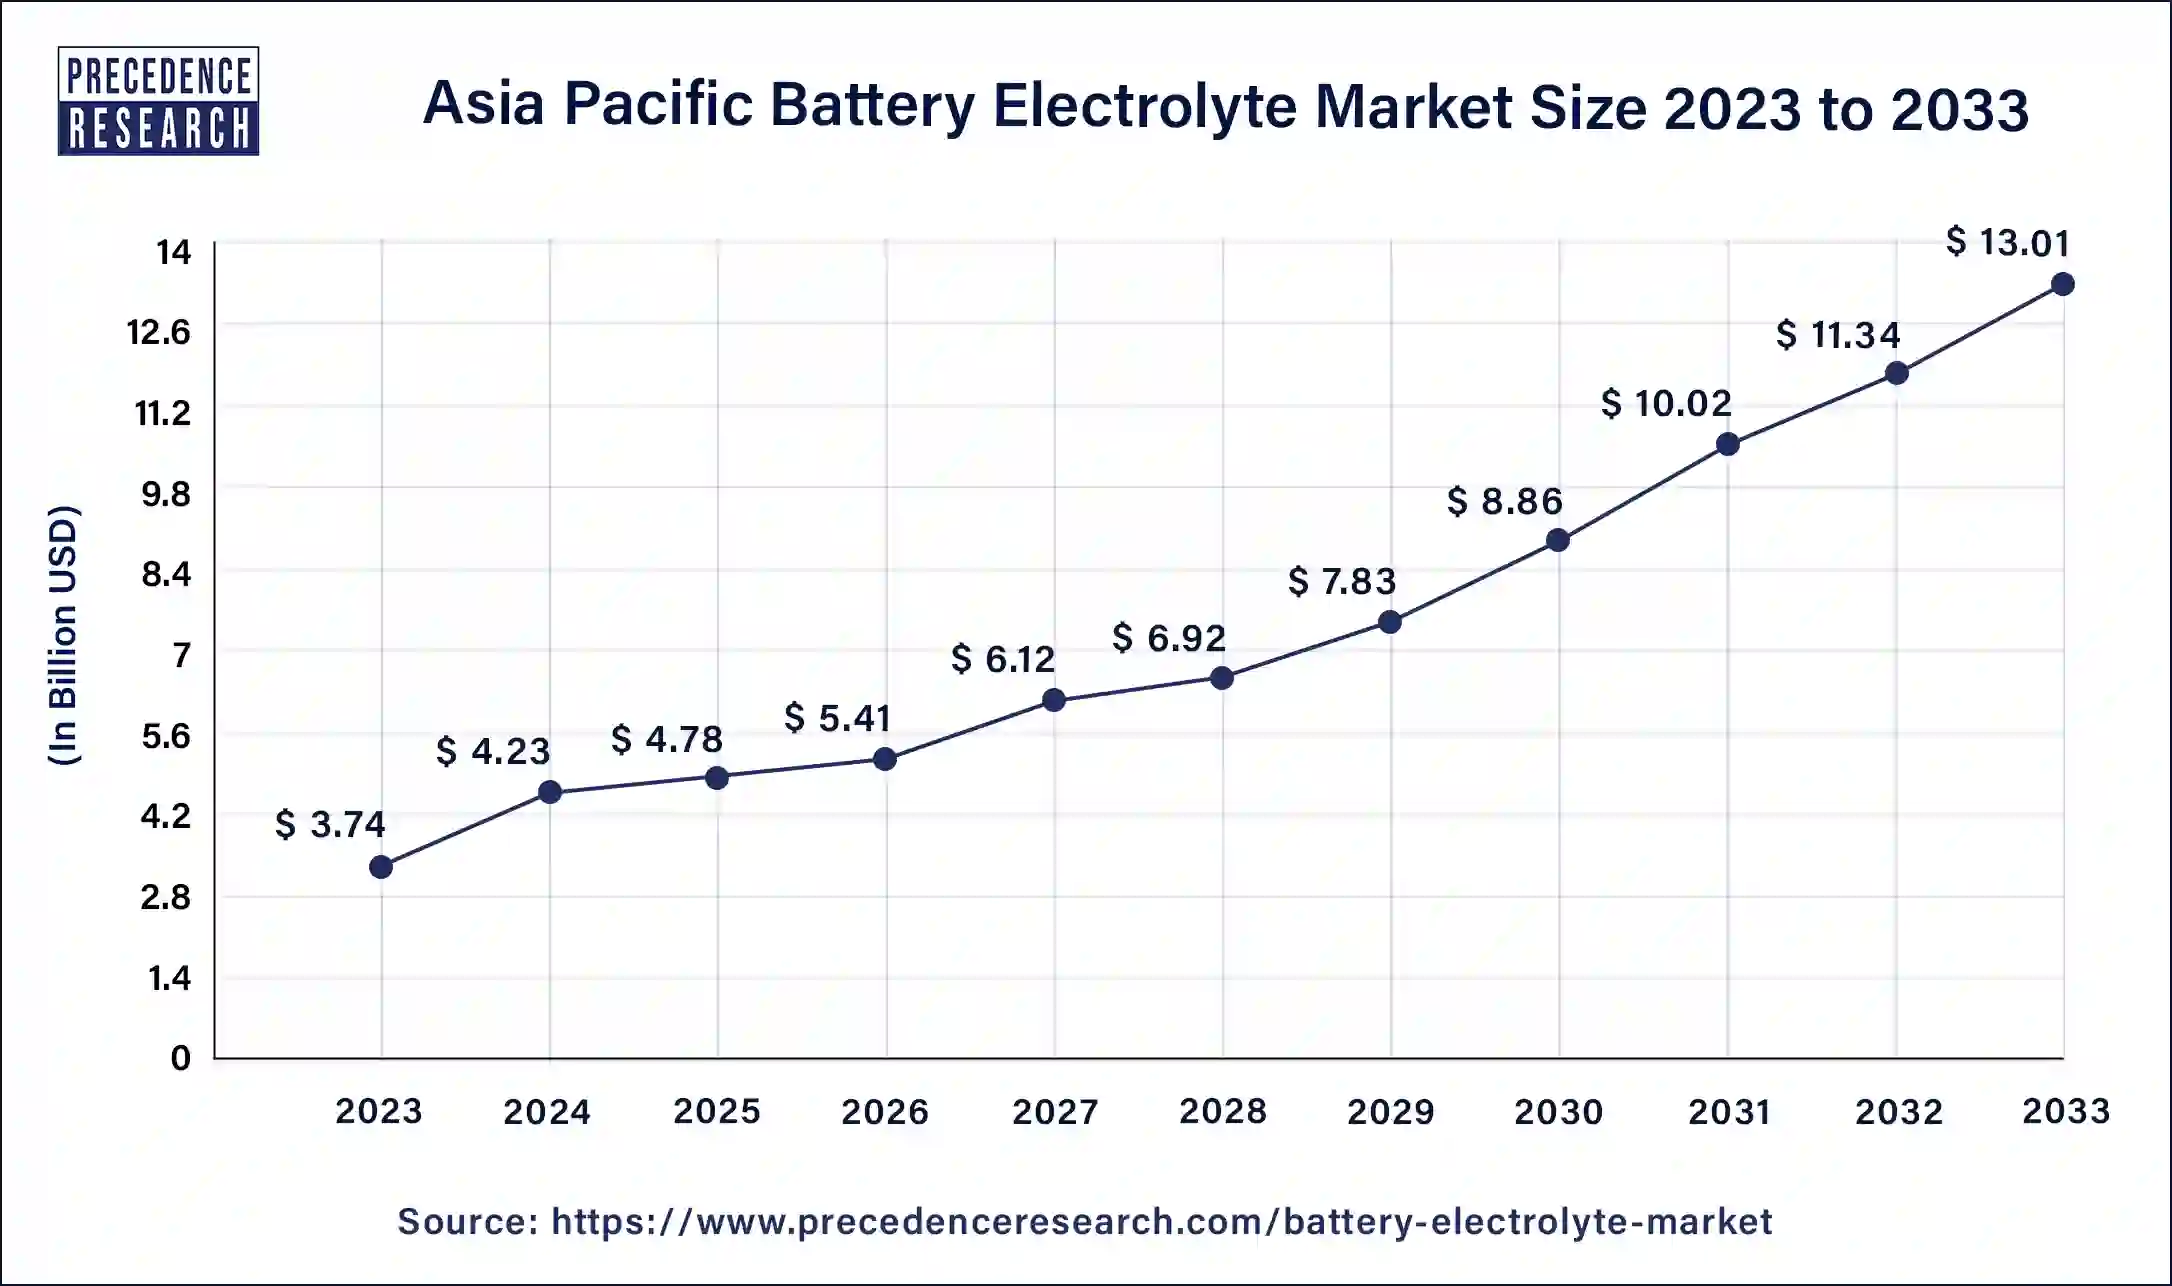 Asia Pacific Battery Electrolyte Market Size 2024 to 2033